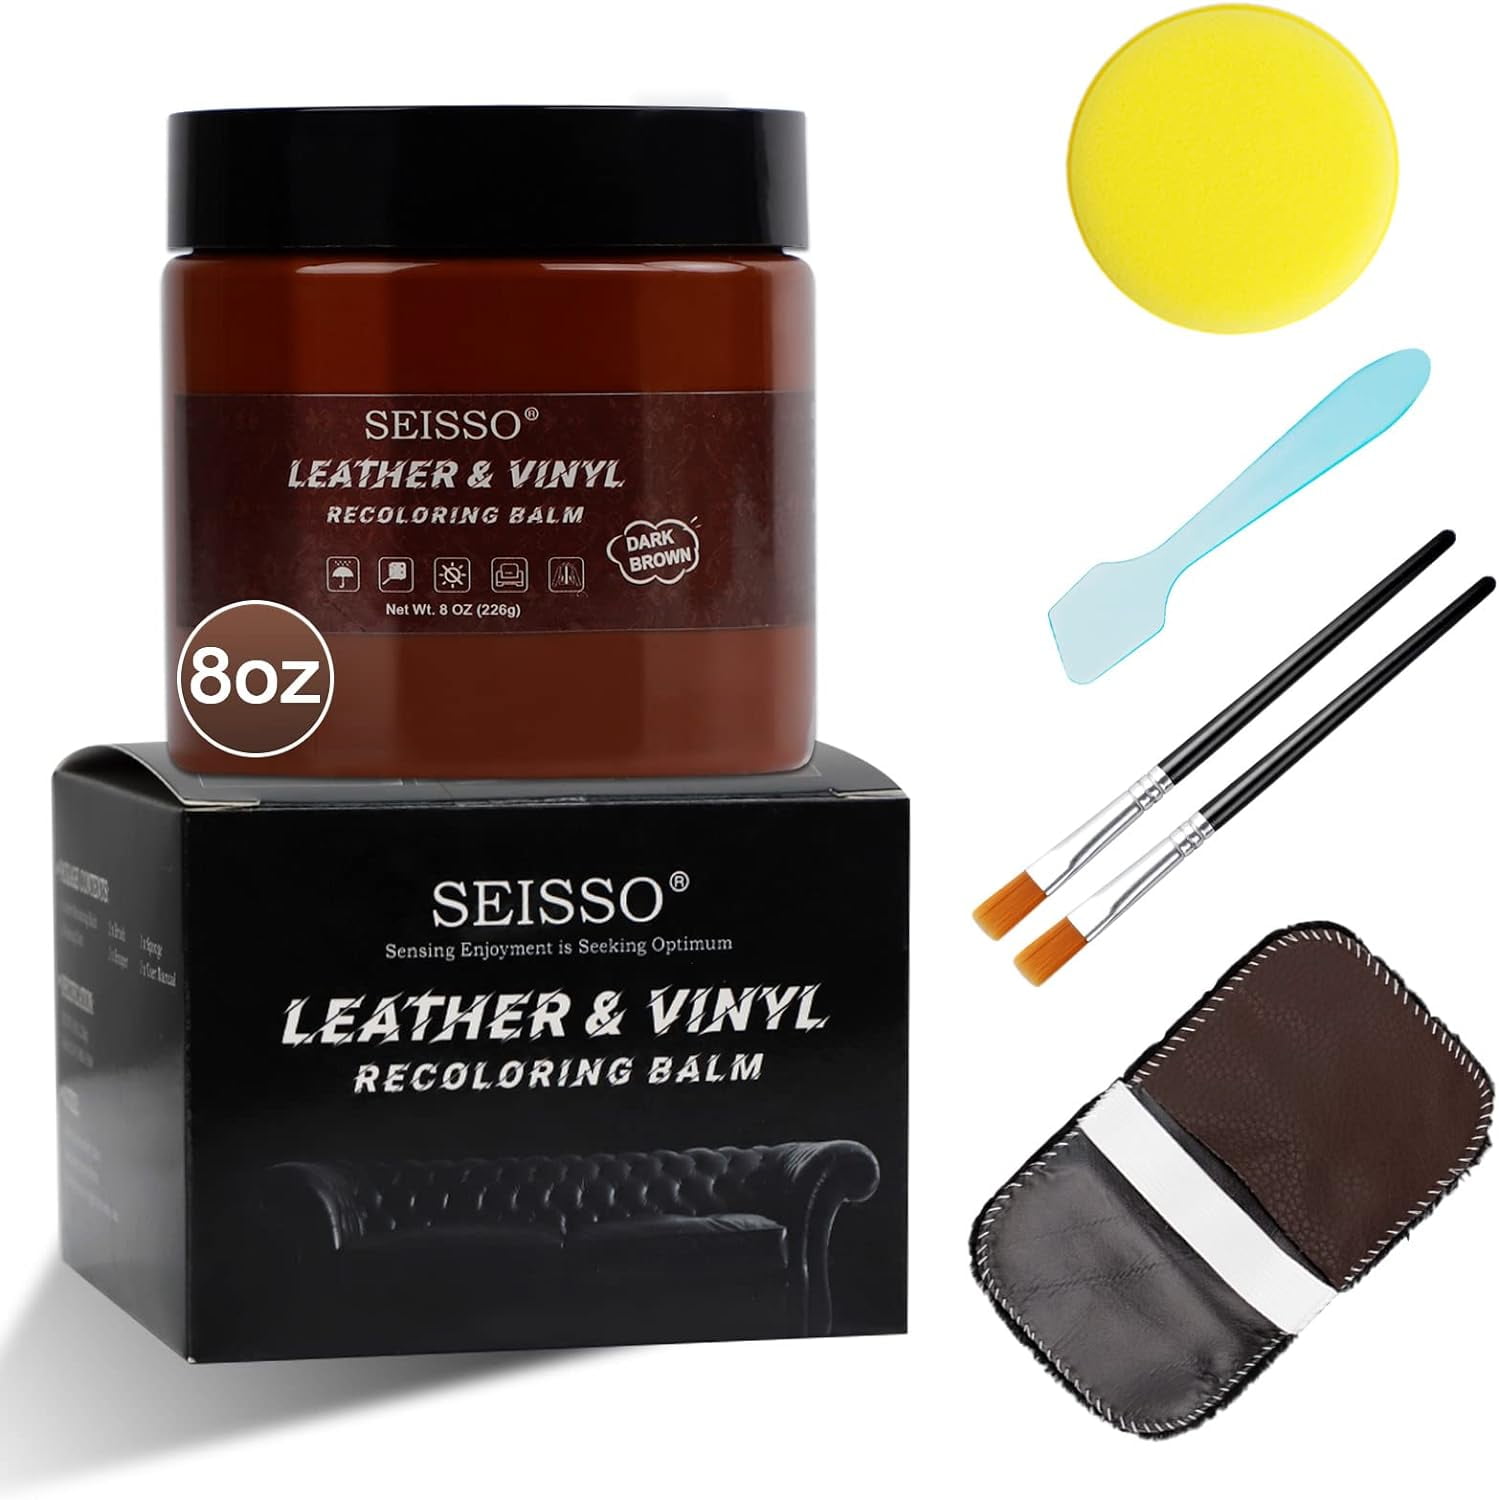 FORTIVO Dark Brown Leather Recoloring Balm - Leather Repair Kits for  Couches - Leather Usedr for Couches Brown Car Seat, Boots - Leather Couch  Repair